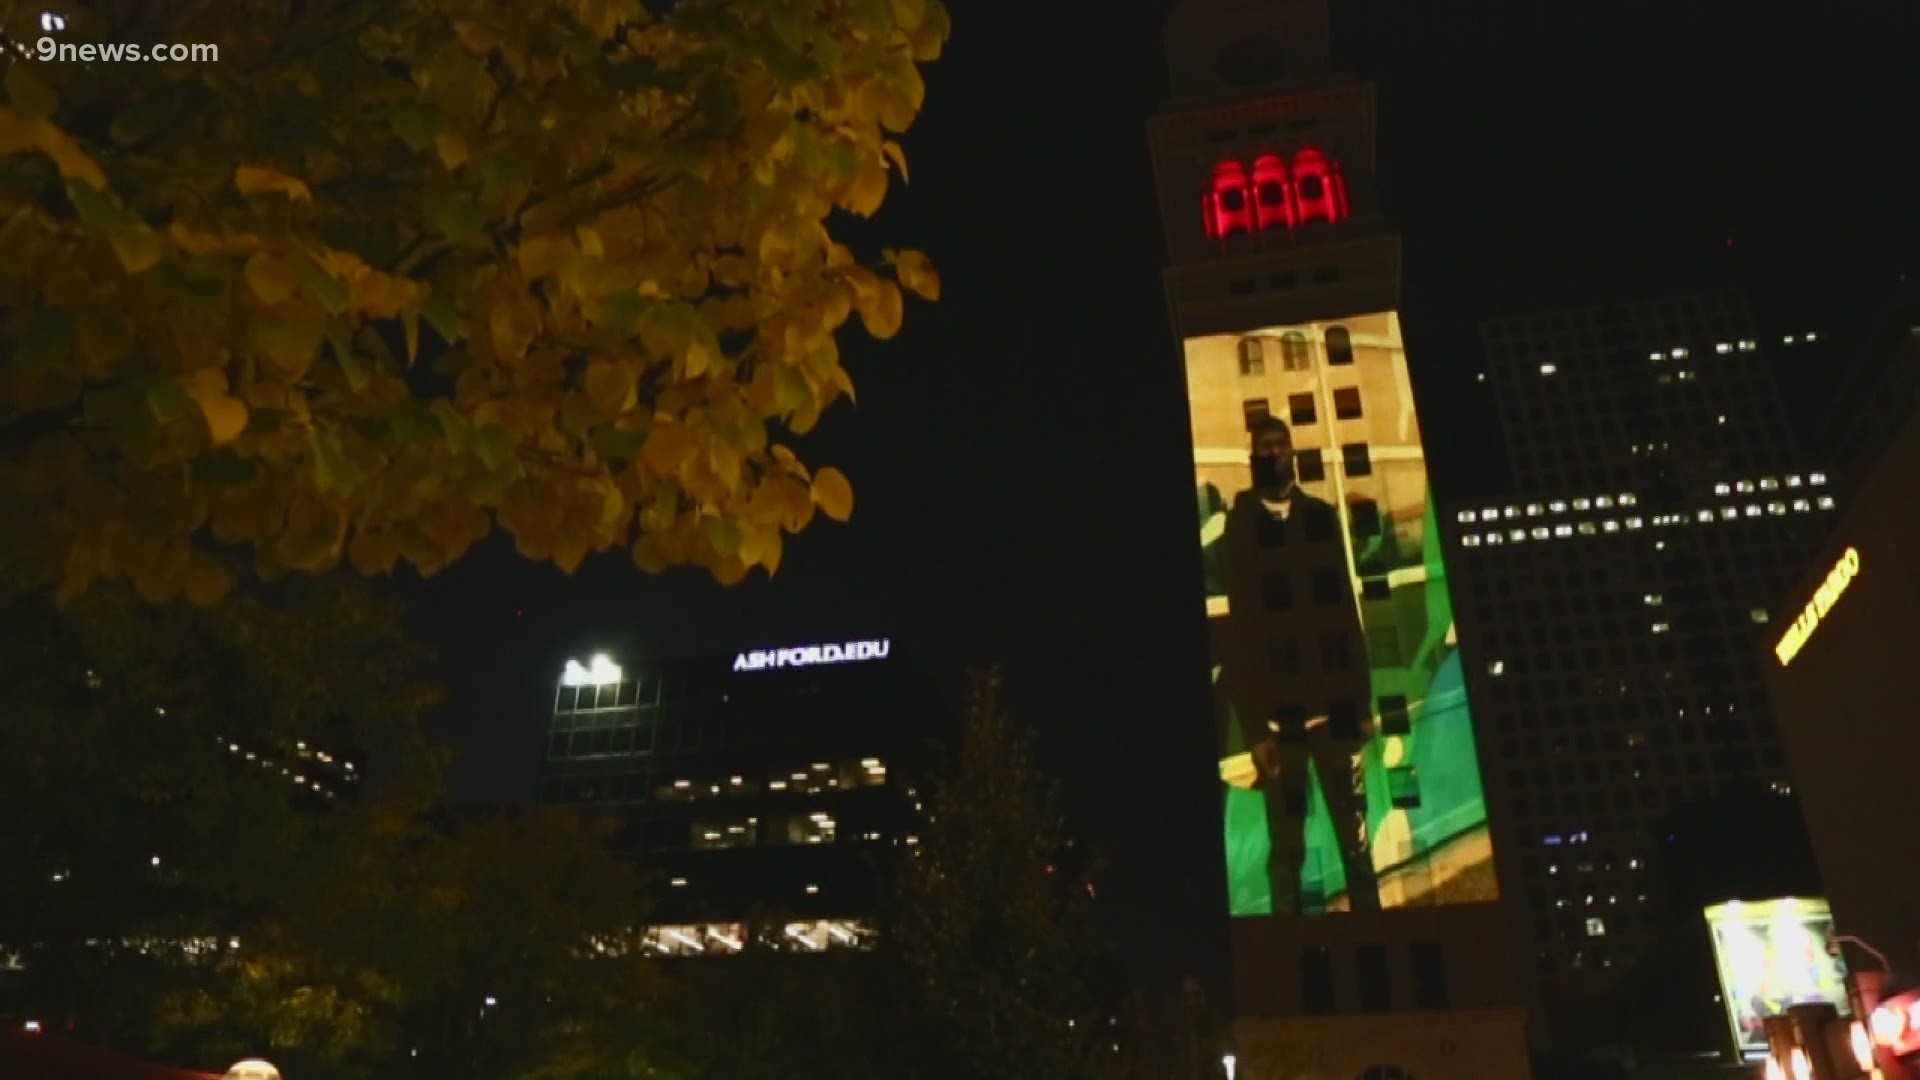 Looking at the big clock tower in downtown Denver will tell you two things: What time it is and why artists say it's also time for change.